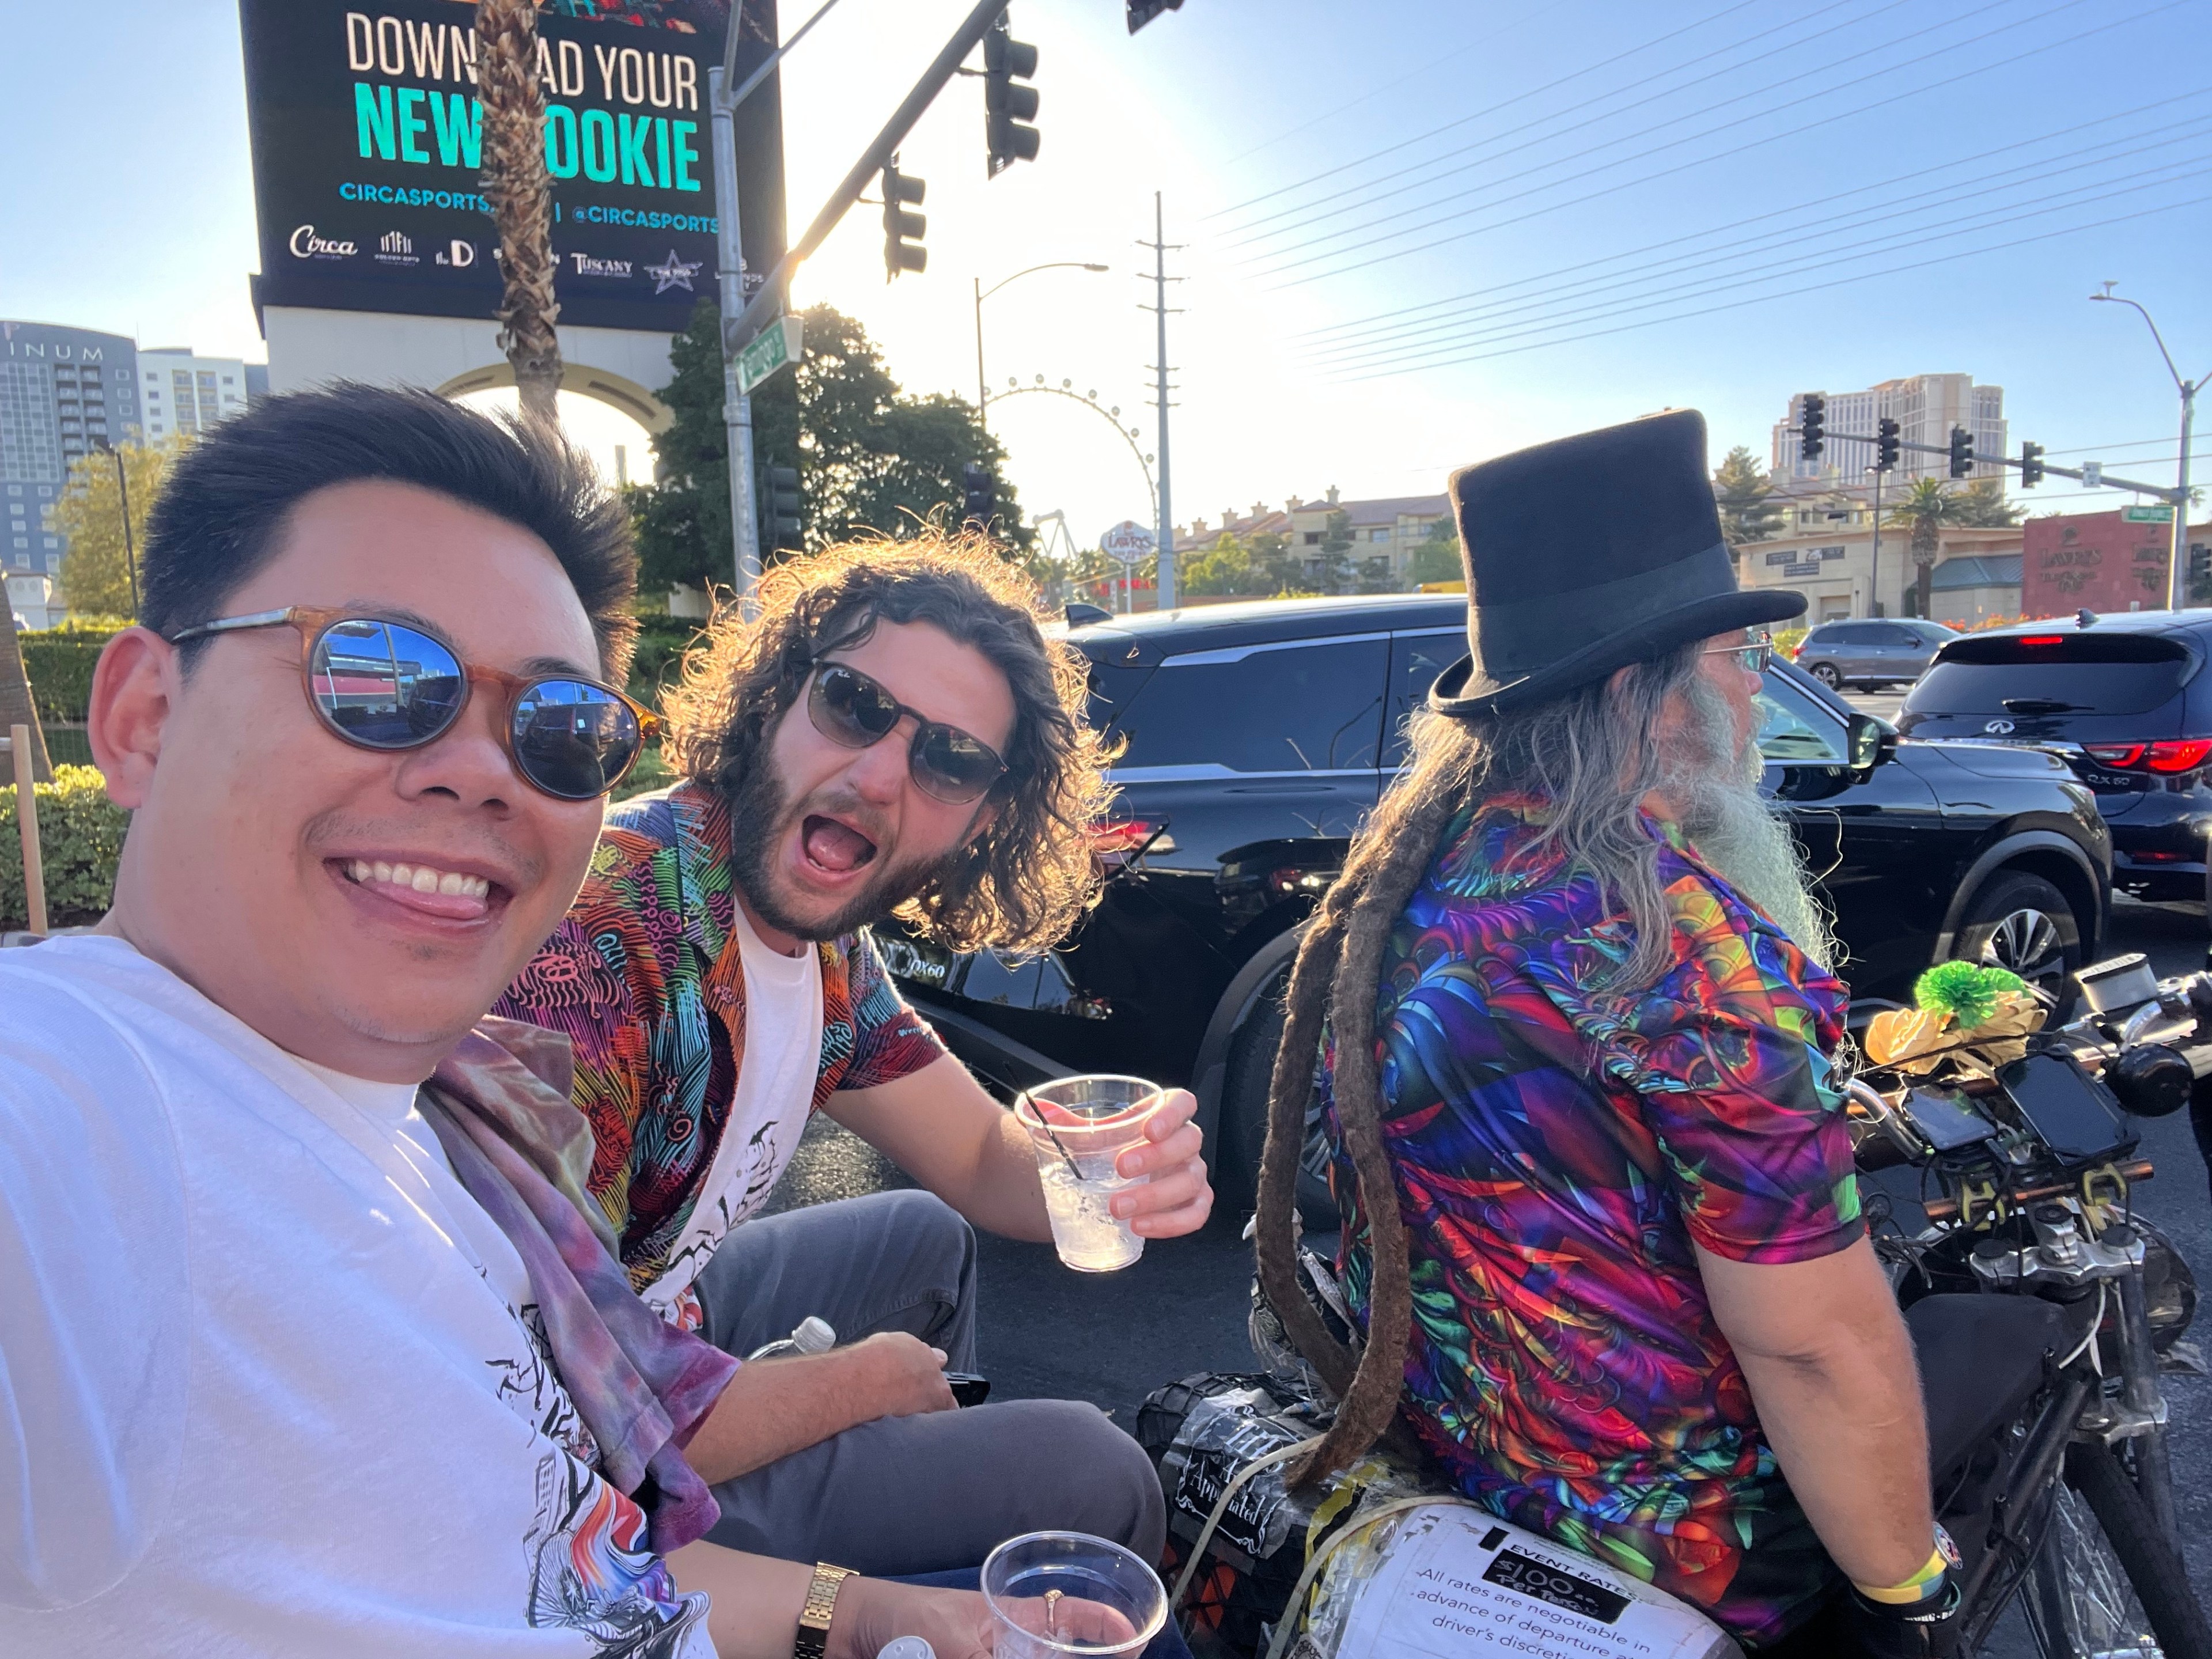 Three men in vibrant attire are enjoying drinks on a street corner; one has long dreadlocks and a top hat. Behind them are cars and a large billboard.